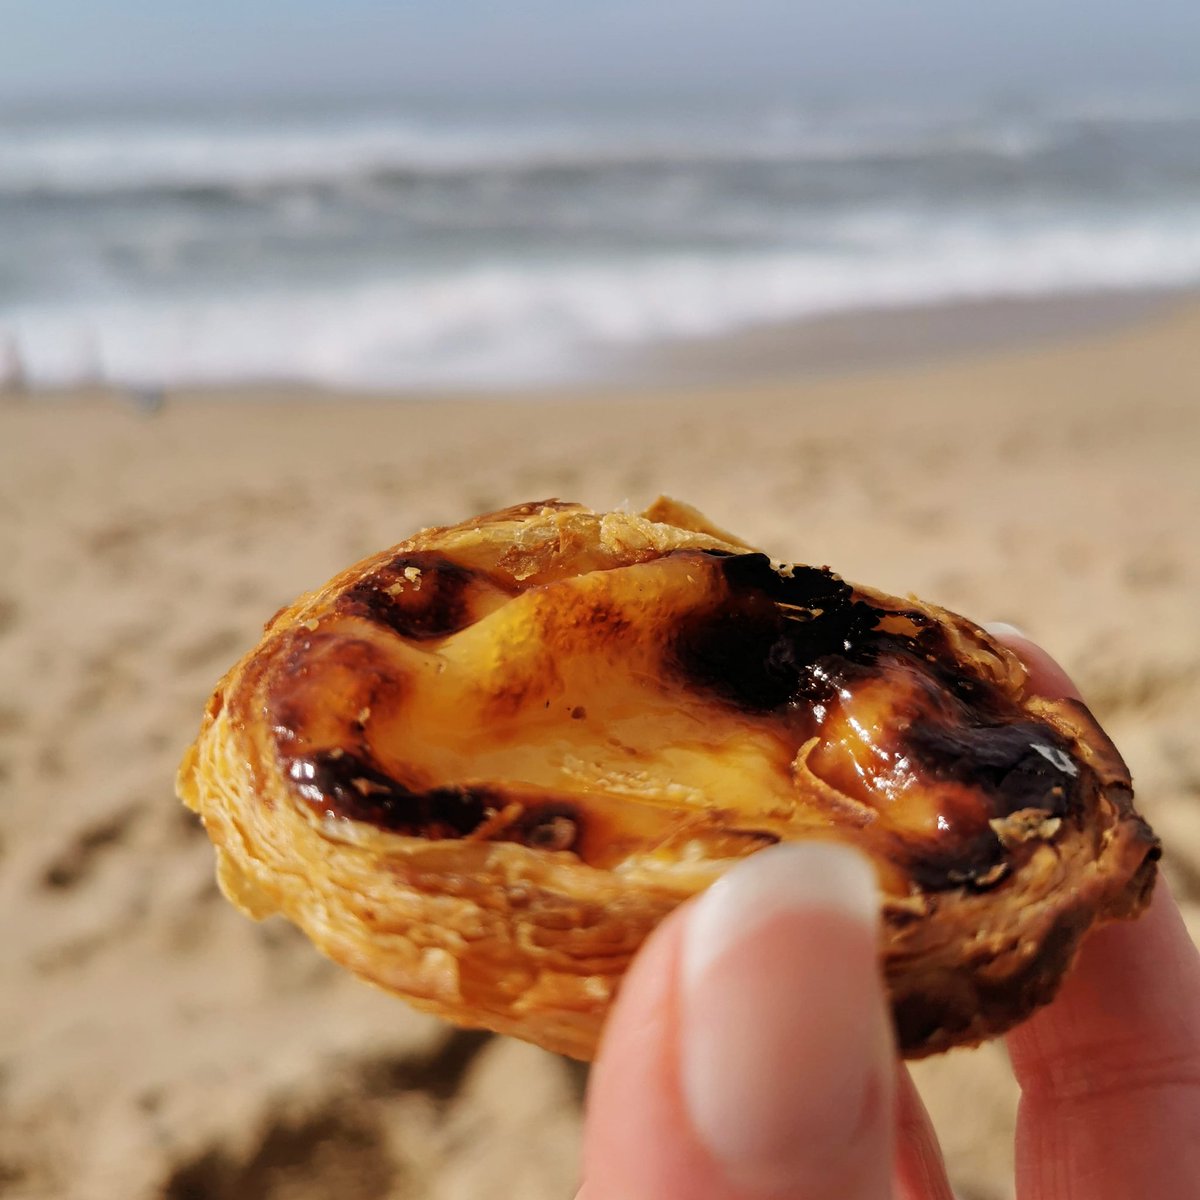 Flashback to a few days seeing friends in Portugal last week. Many highlights, including tarts on the beach of course.